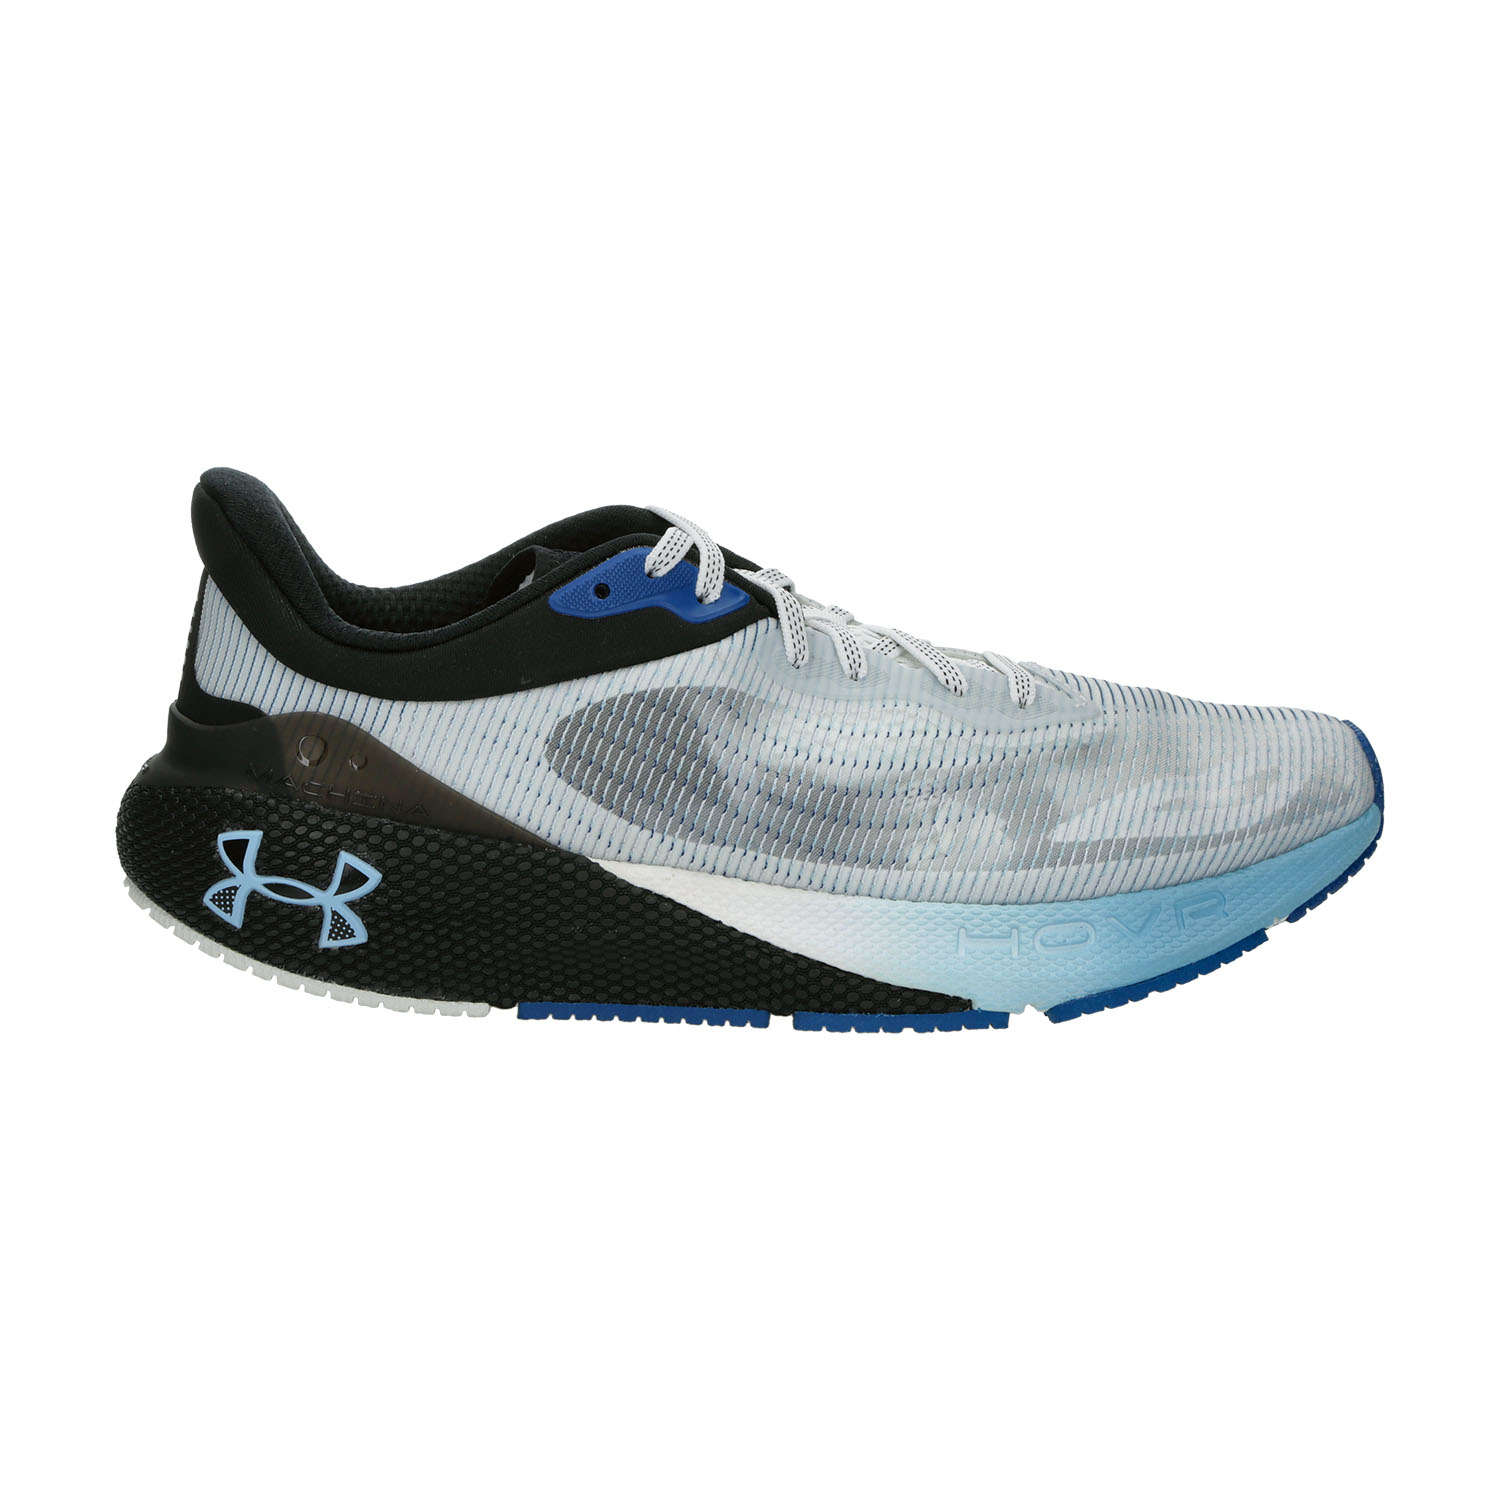 Under Armour Surge 3 Mens Running Shoes | SportsDirect.com USA